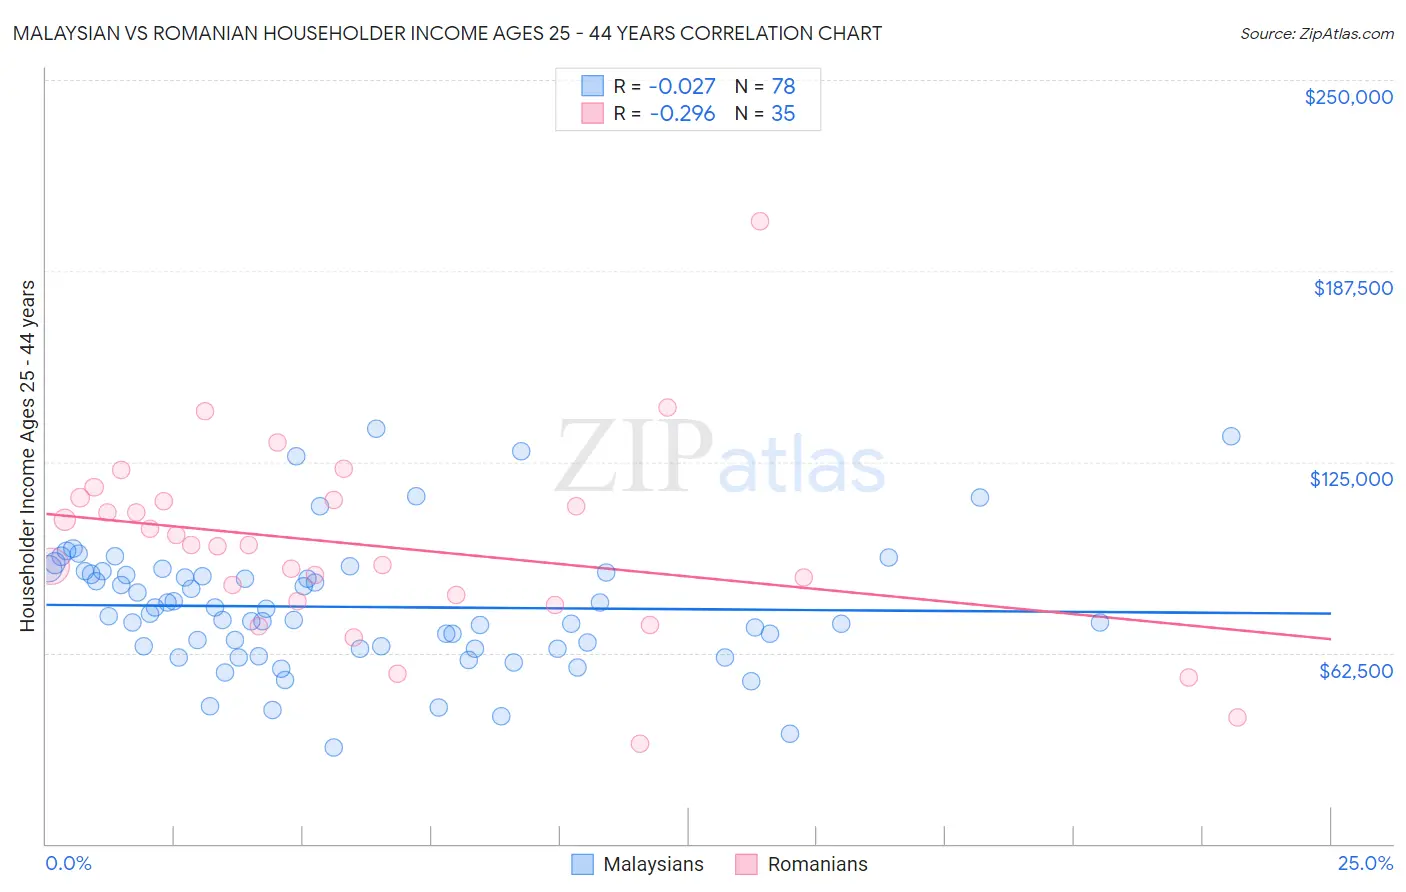 Malaysian vs Romanian Householder Income Ages 25 - 44 years